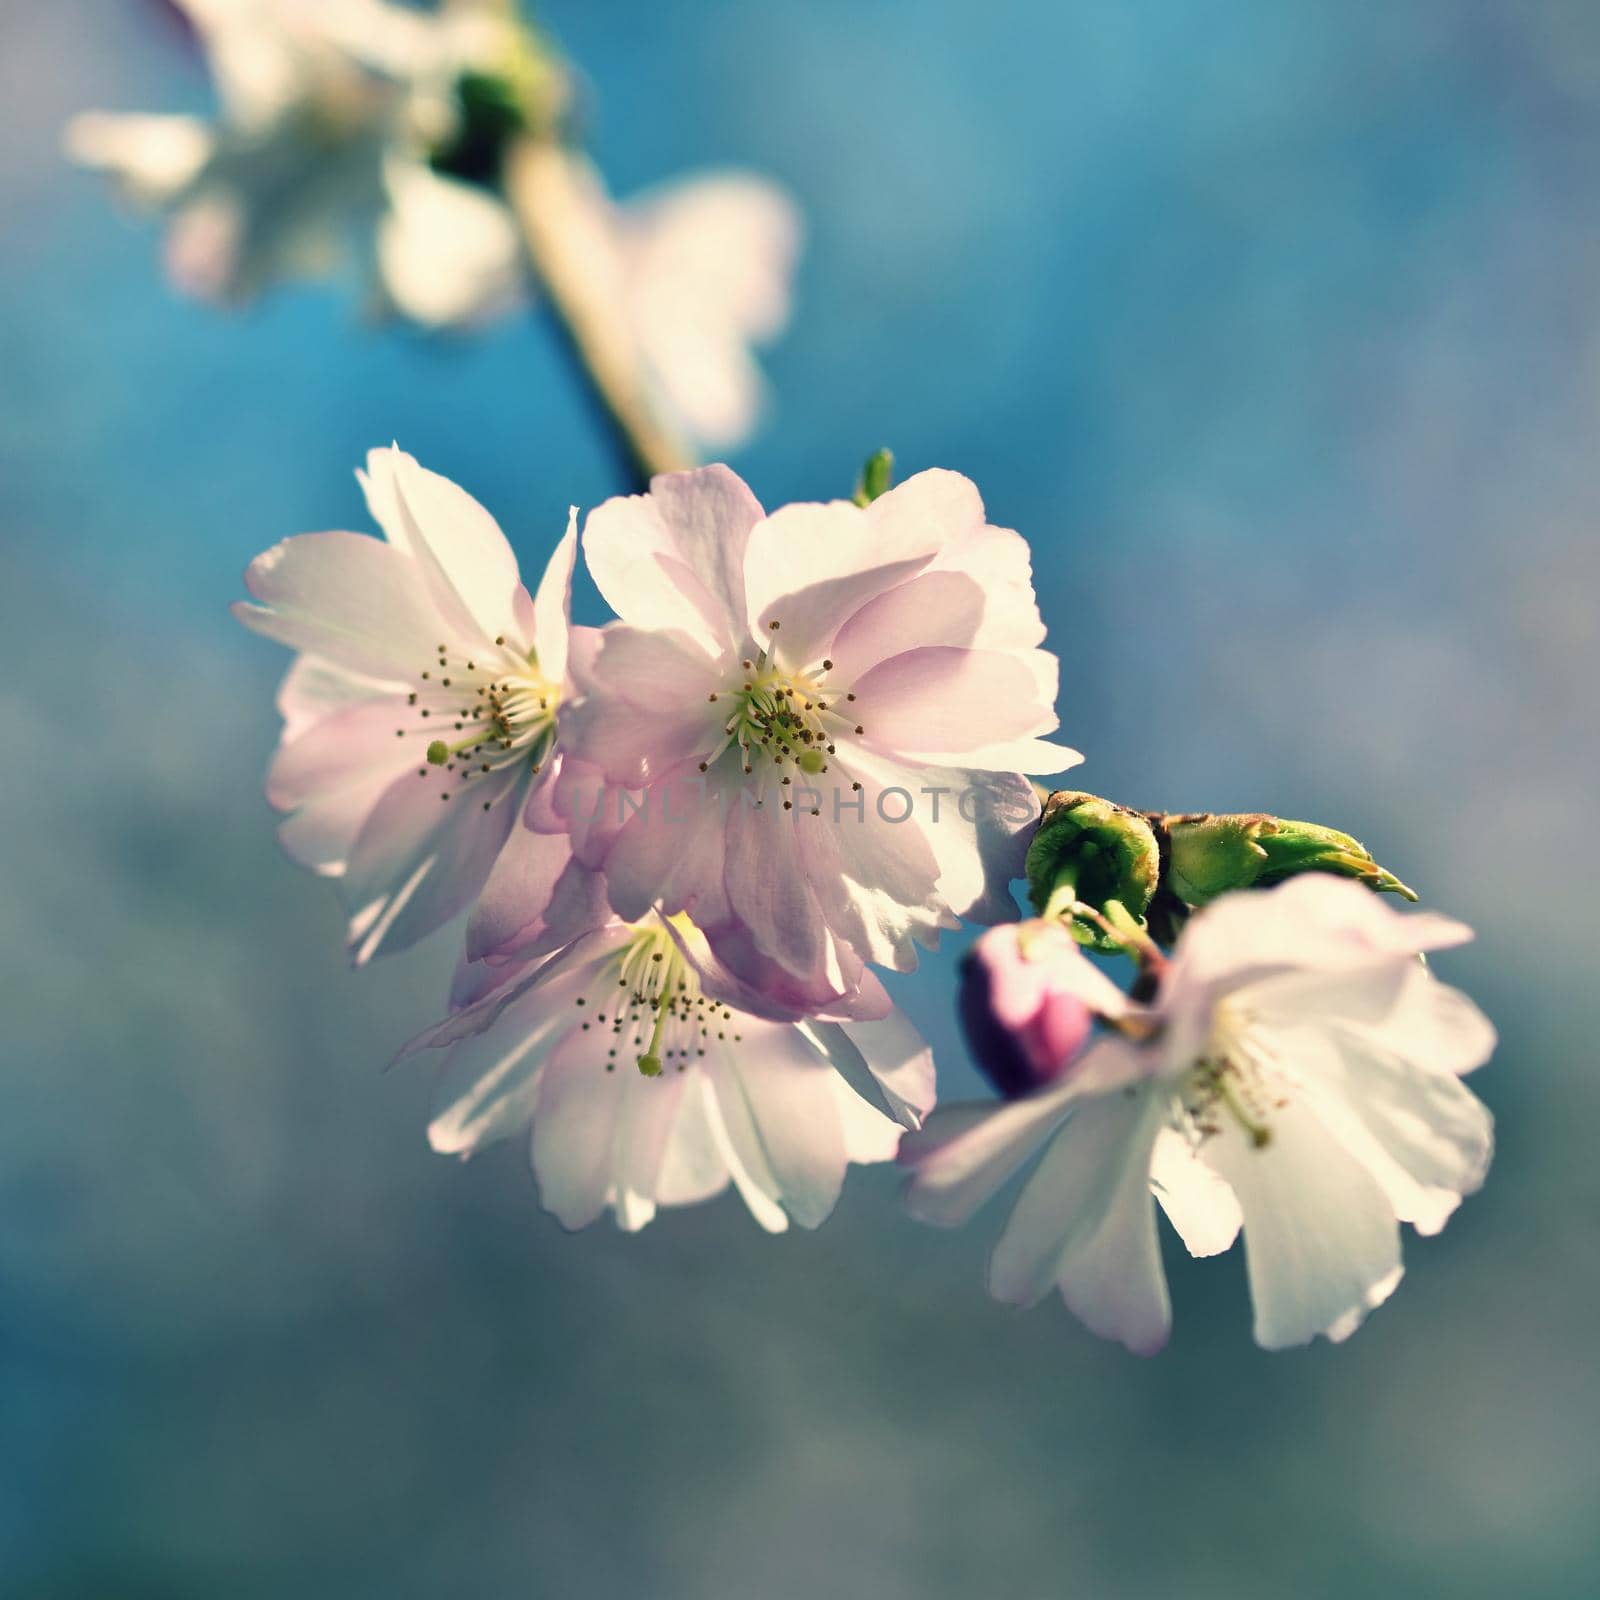 Beautiful blossom tree. Nature scene with sun on Sunny day. Spring flowers. Abstract blurred background in Springtime.  by Montypeter